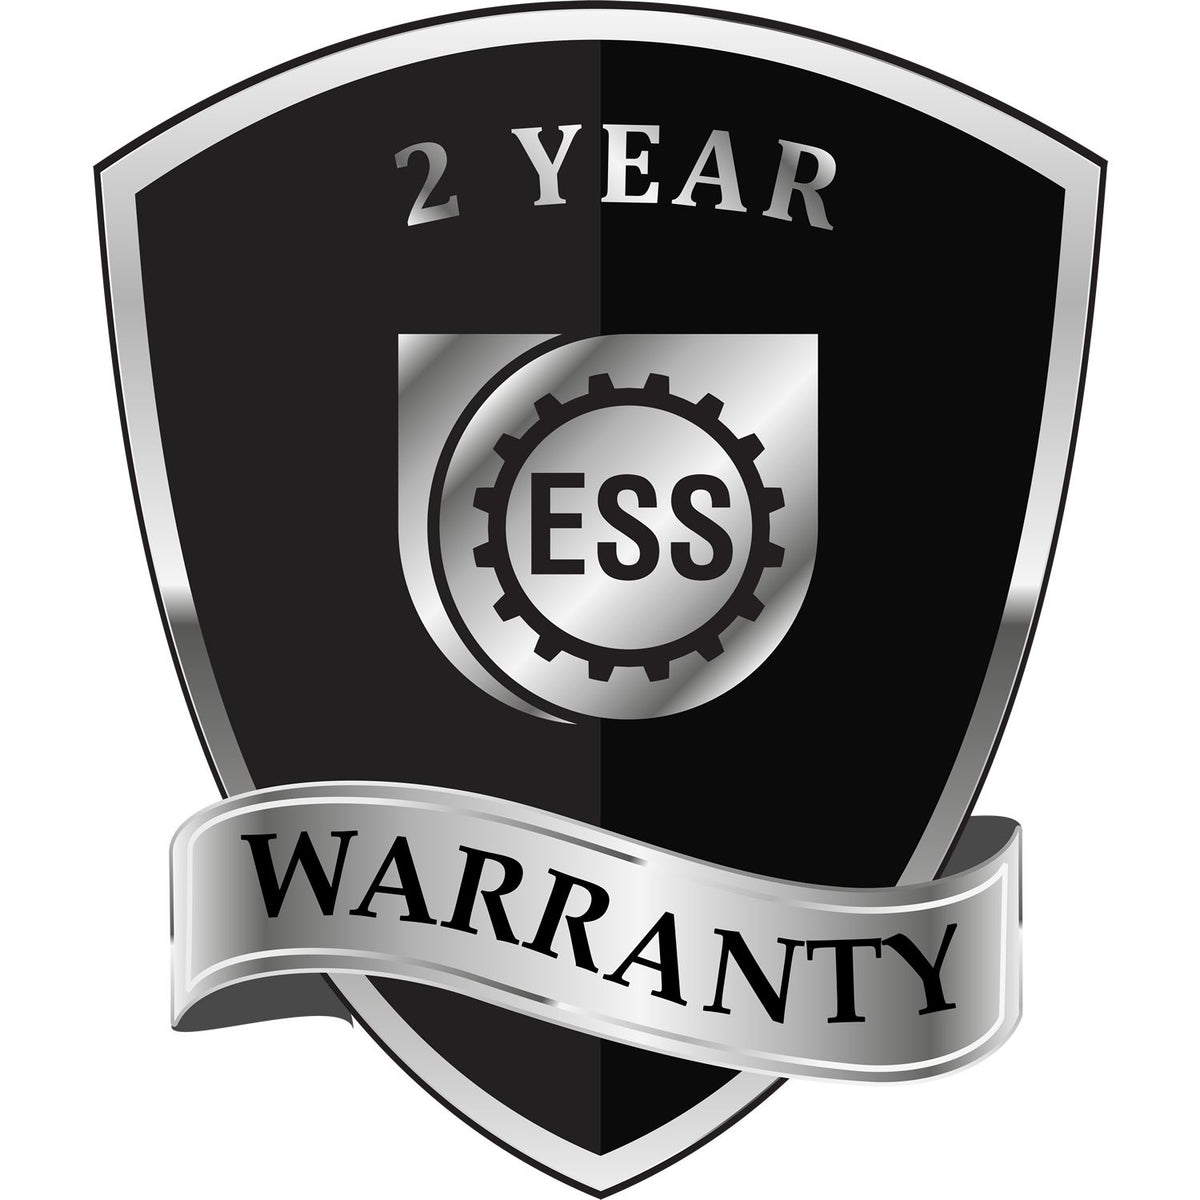 A badge or emblem showing a warranty icon for the Heavy Duty Cast Iron Guam Engineer Seal Embosser